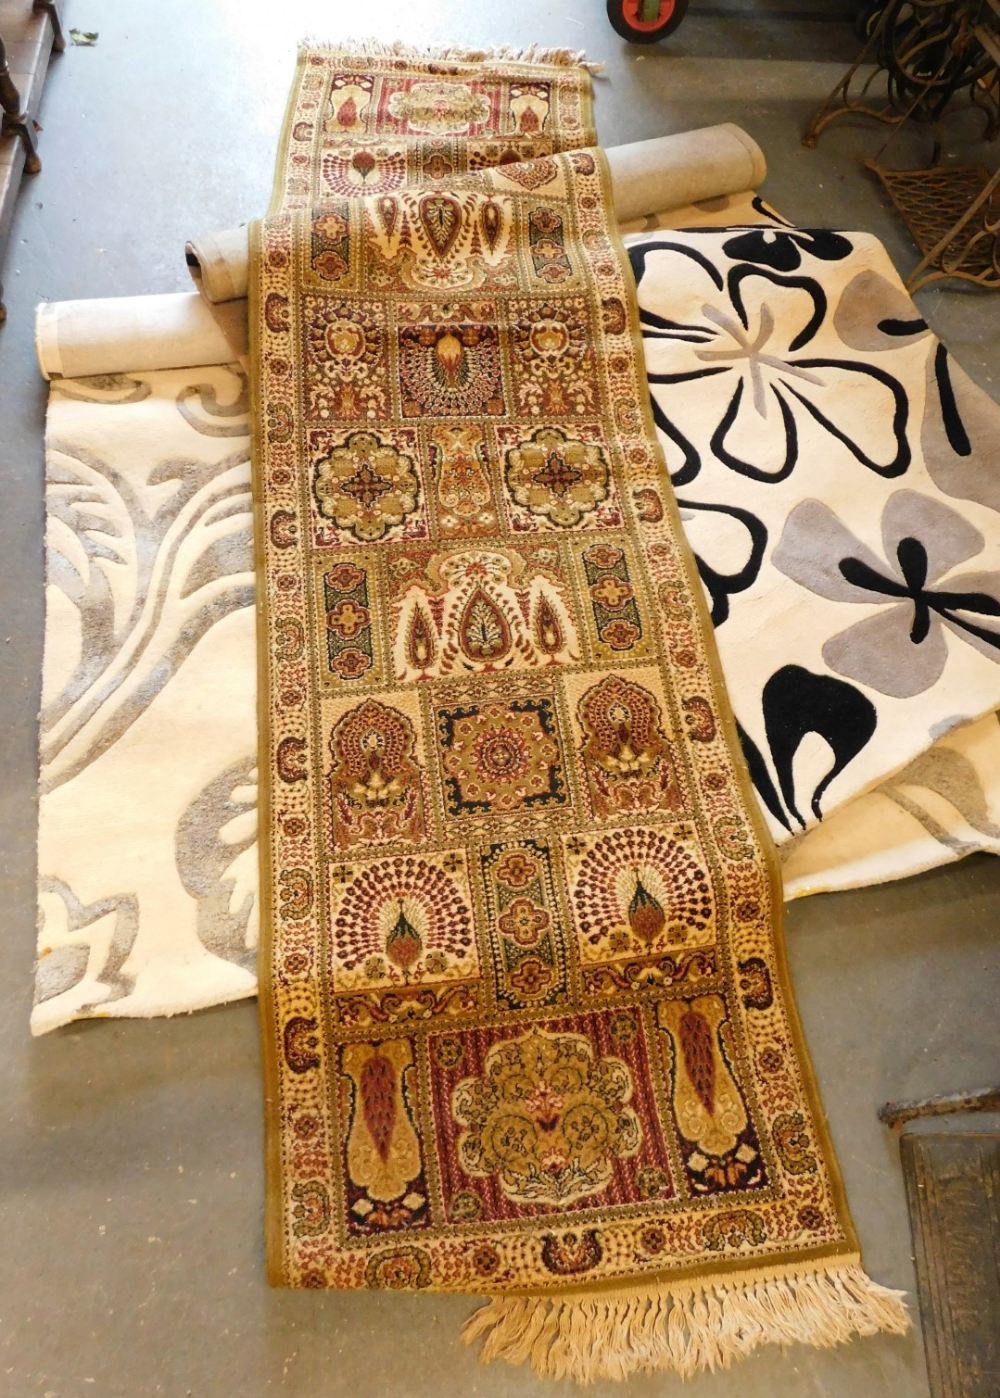 Two abstract floral patterned rugs, together with a runner.